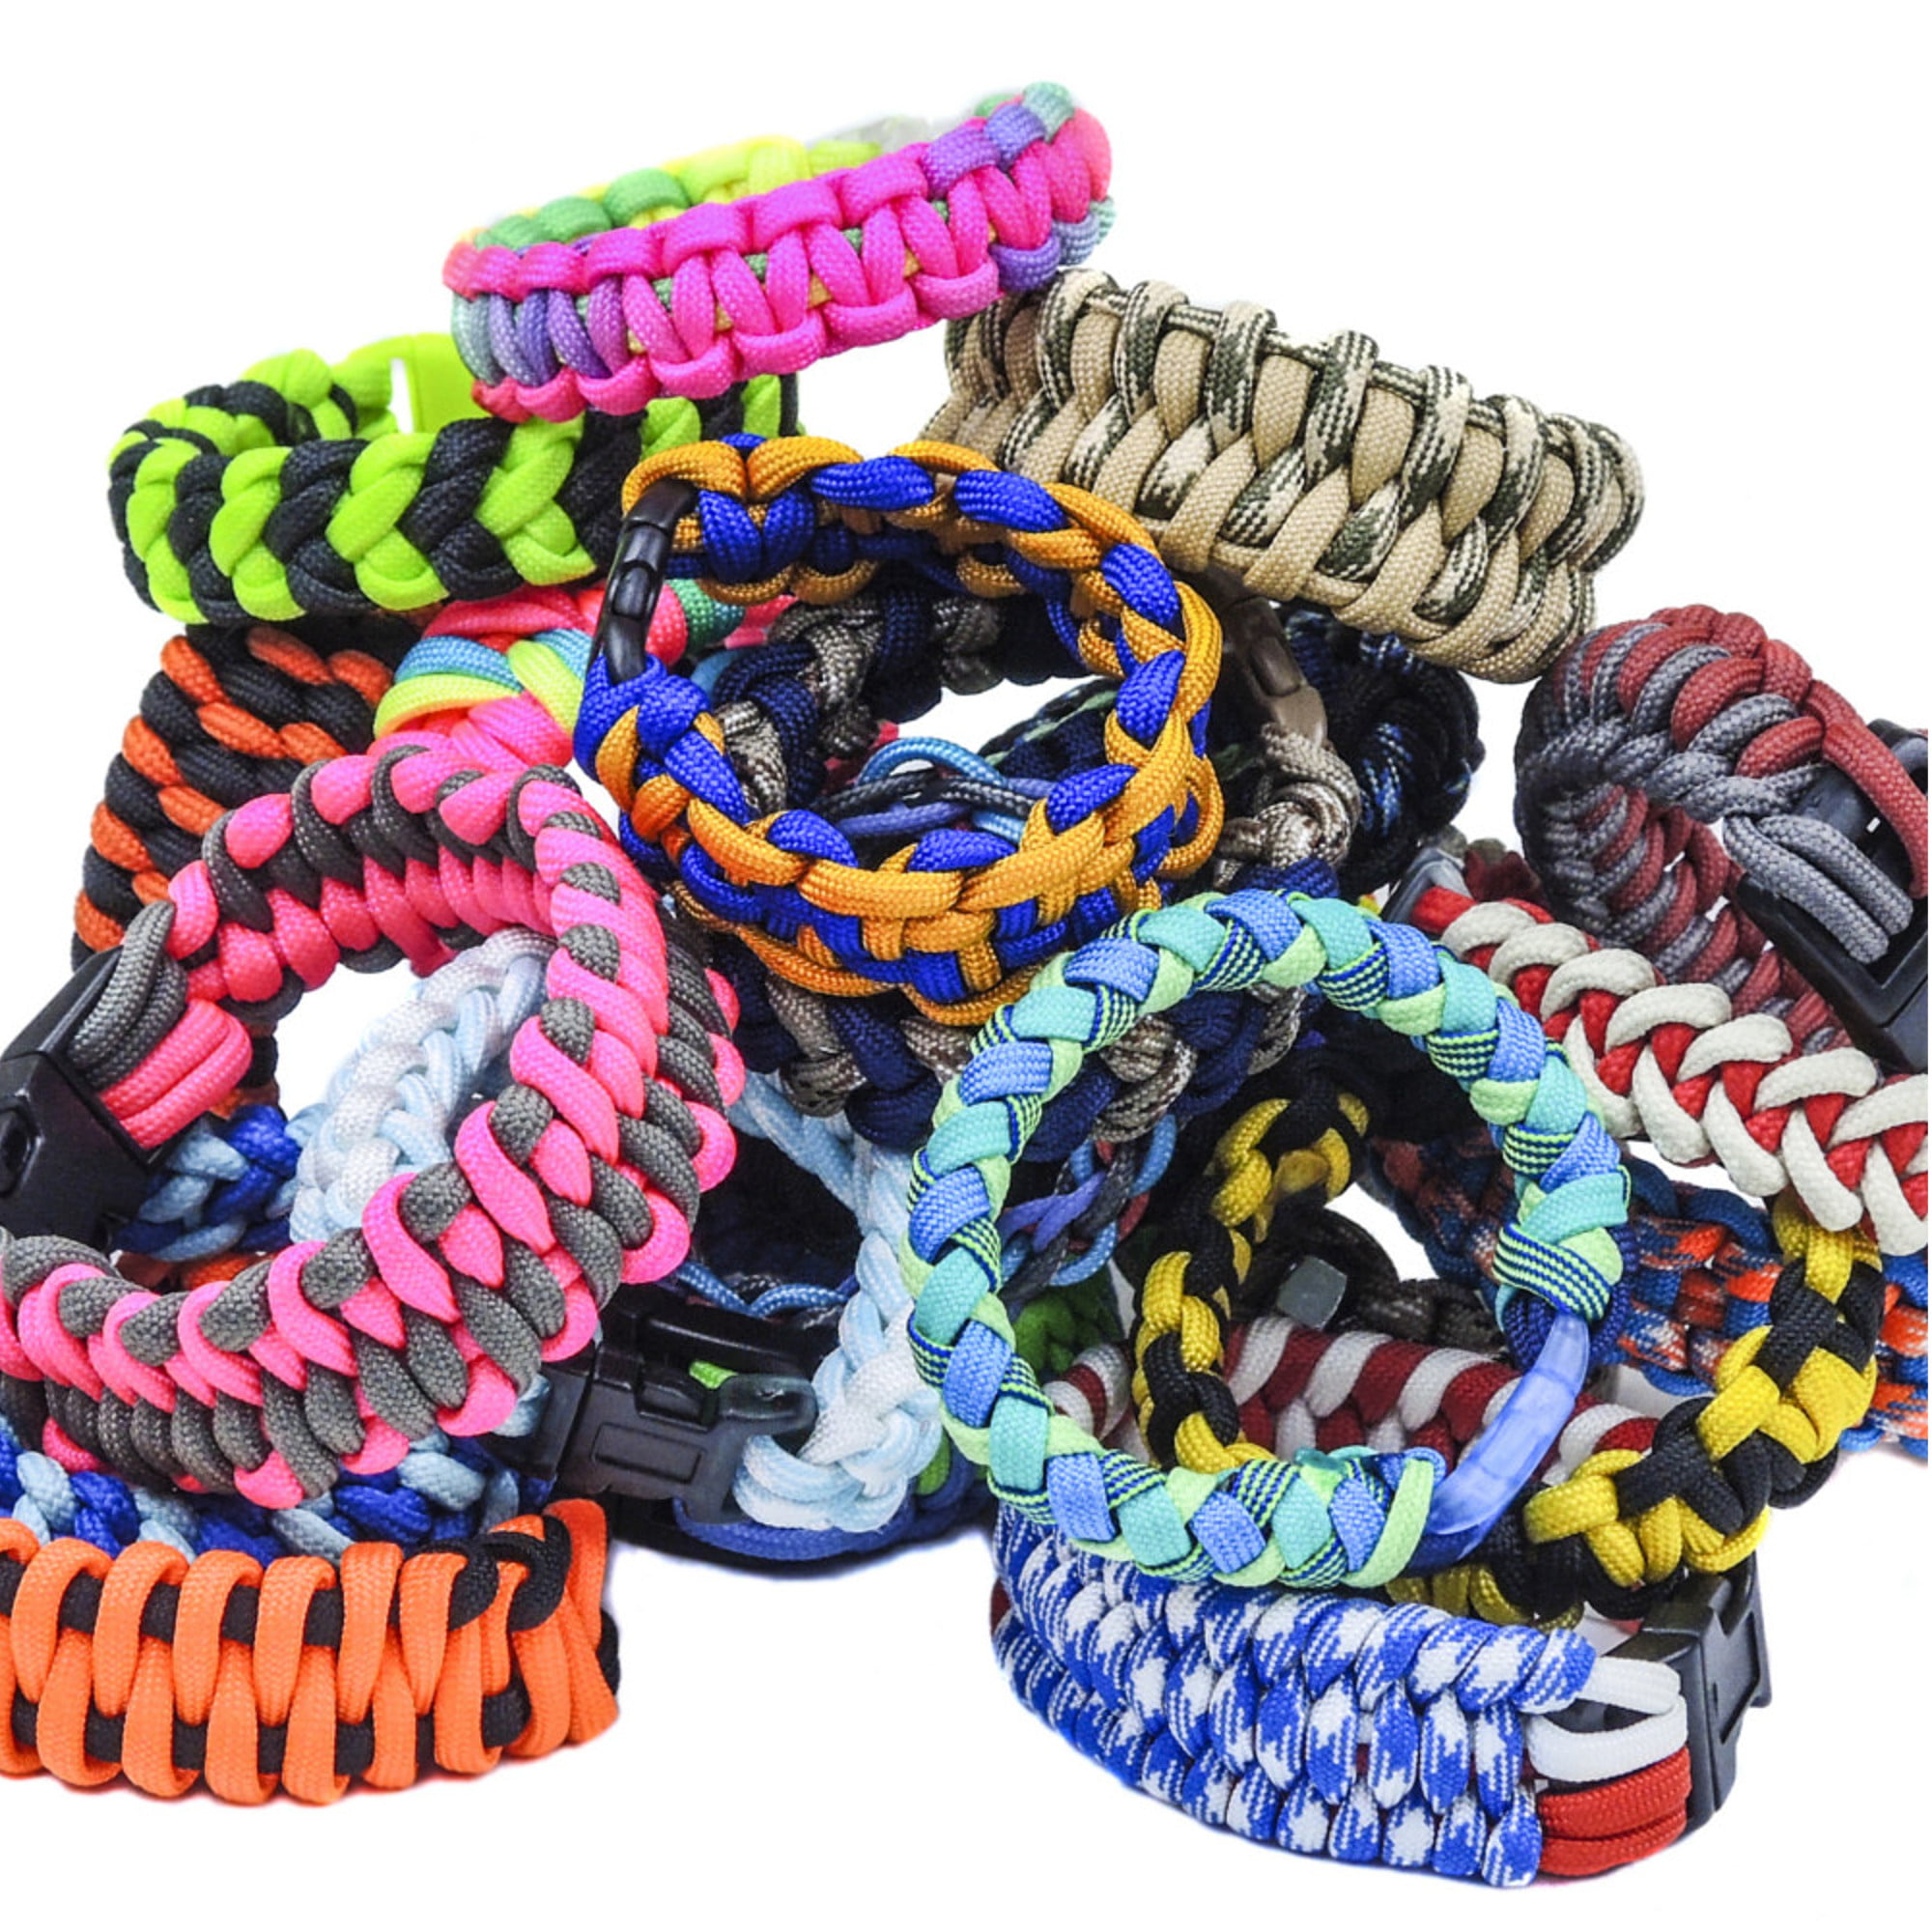 USO Erbil - 550 Cord bracelet making is here for you tonight. Come